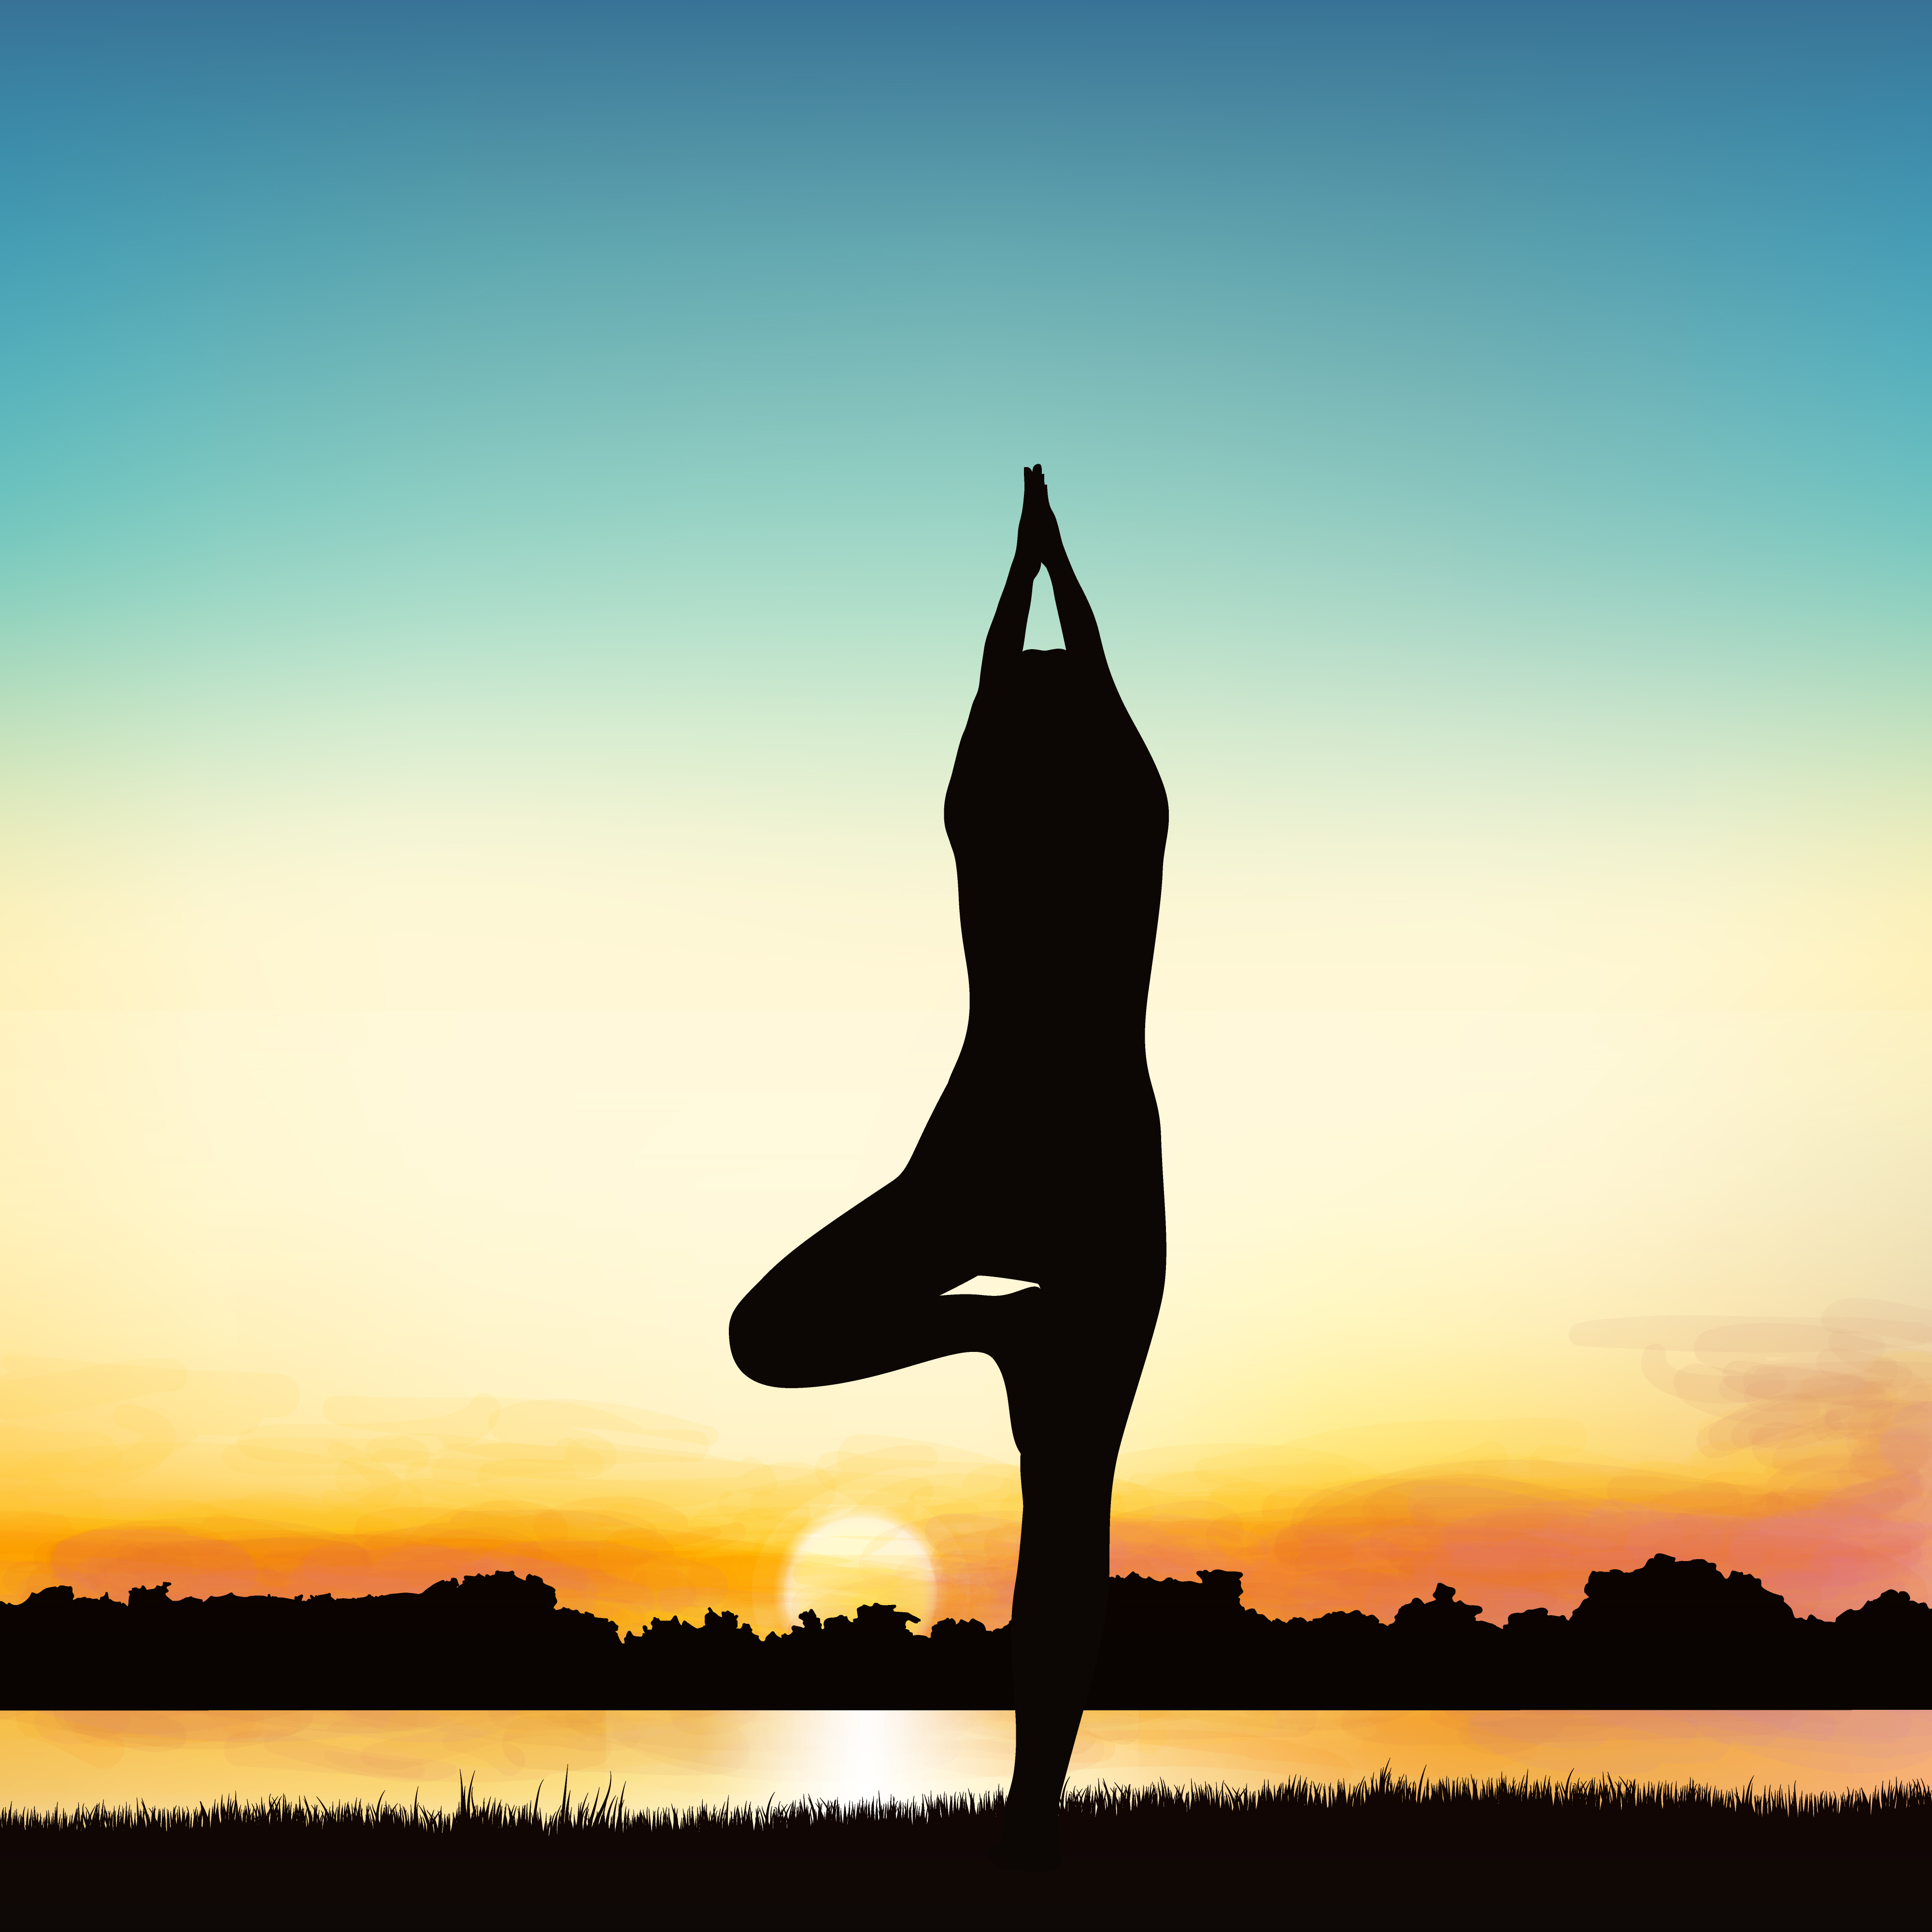 Lady silhouette  image in the posture of Yoga 630295 